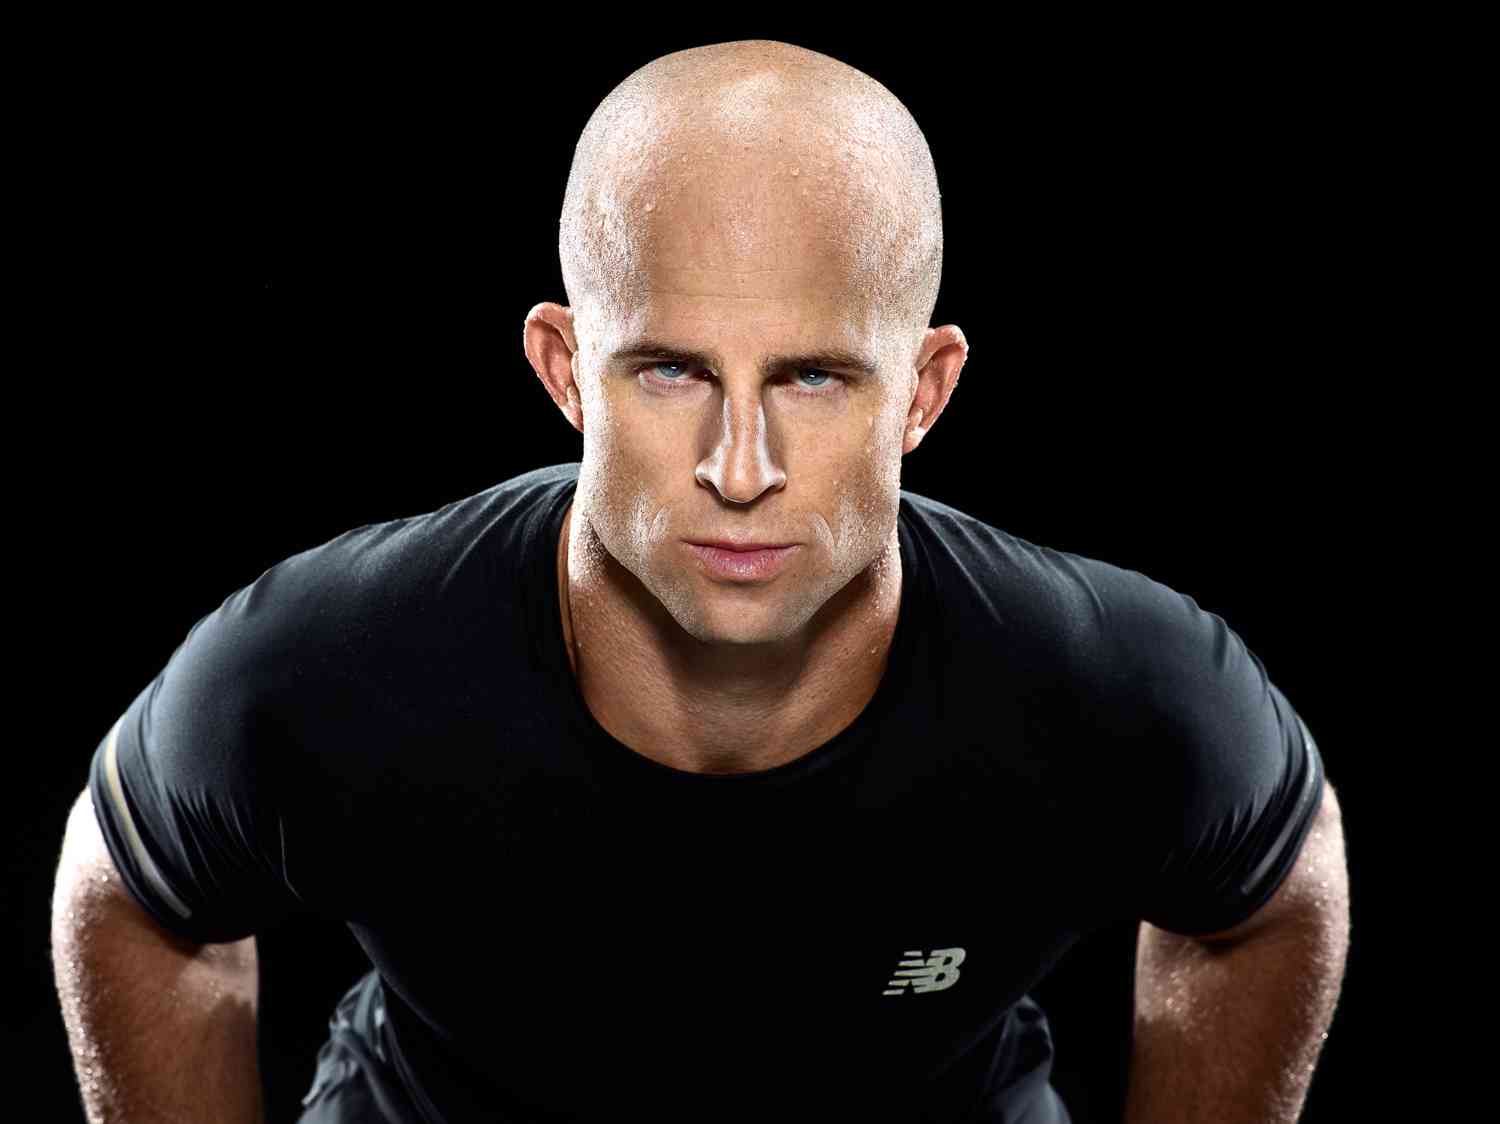 brett gardner news: currently played in MLB for the New York Yankees.